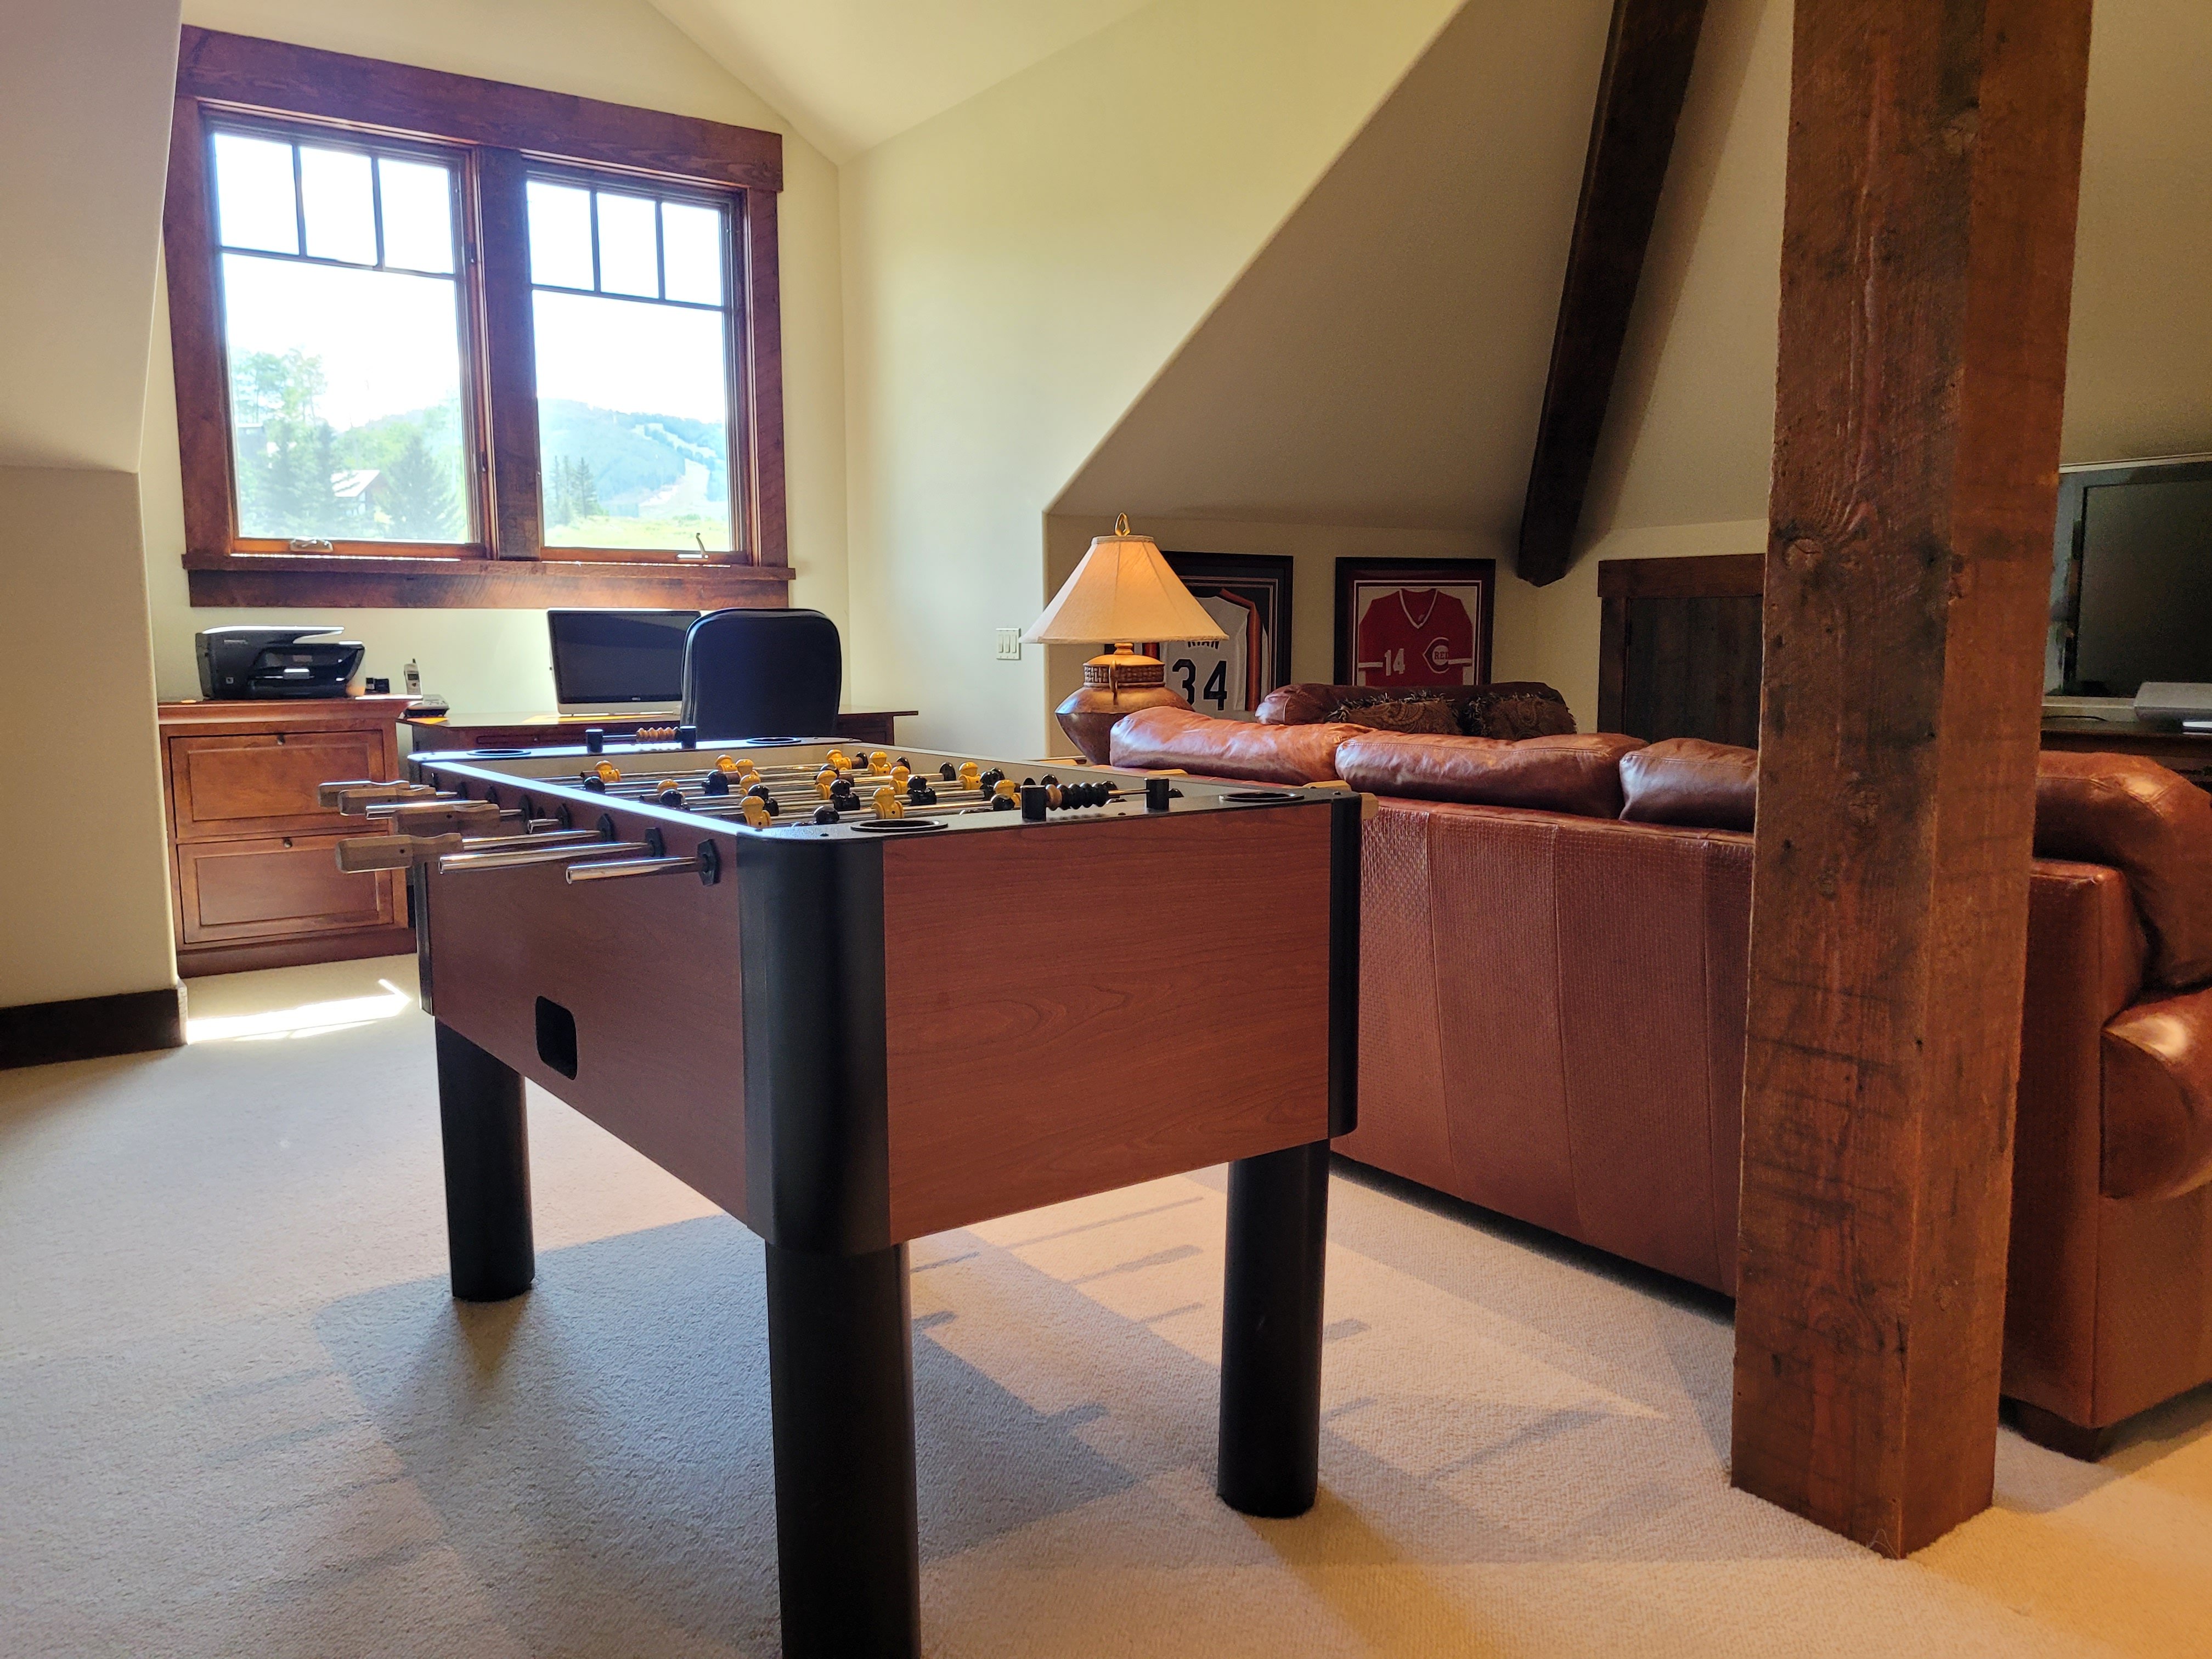 Game room with Foosball table and leather couches